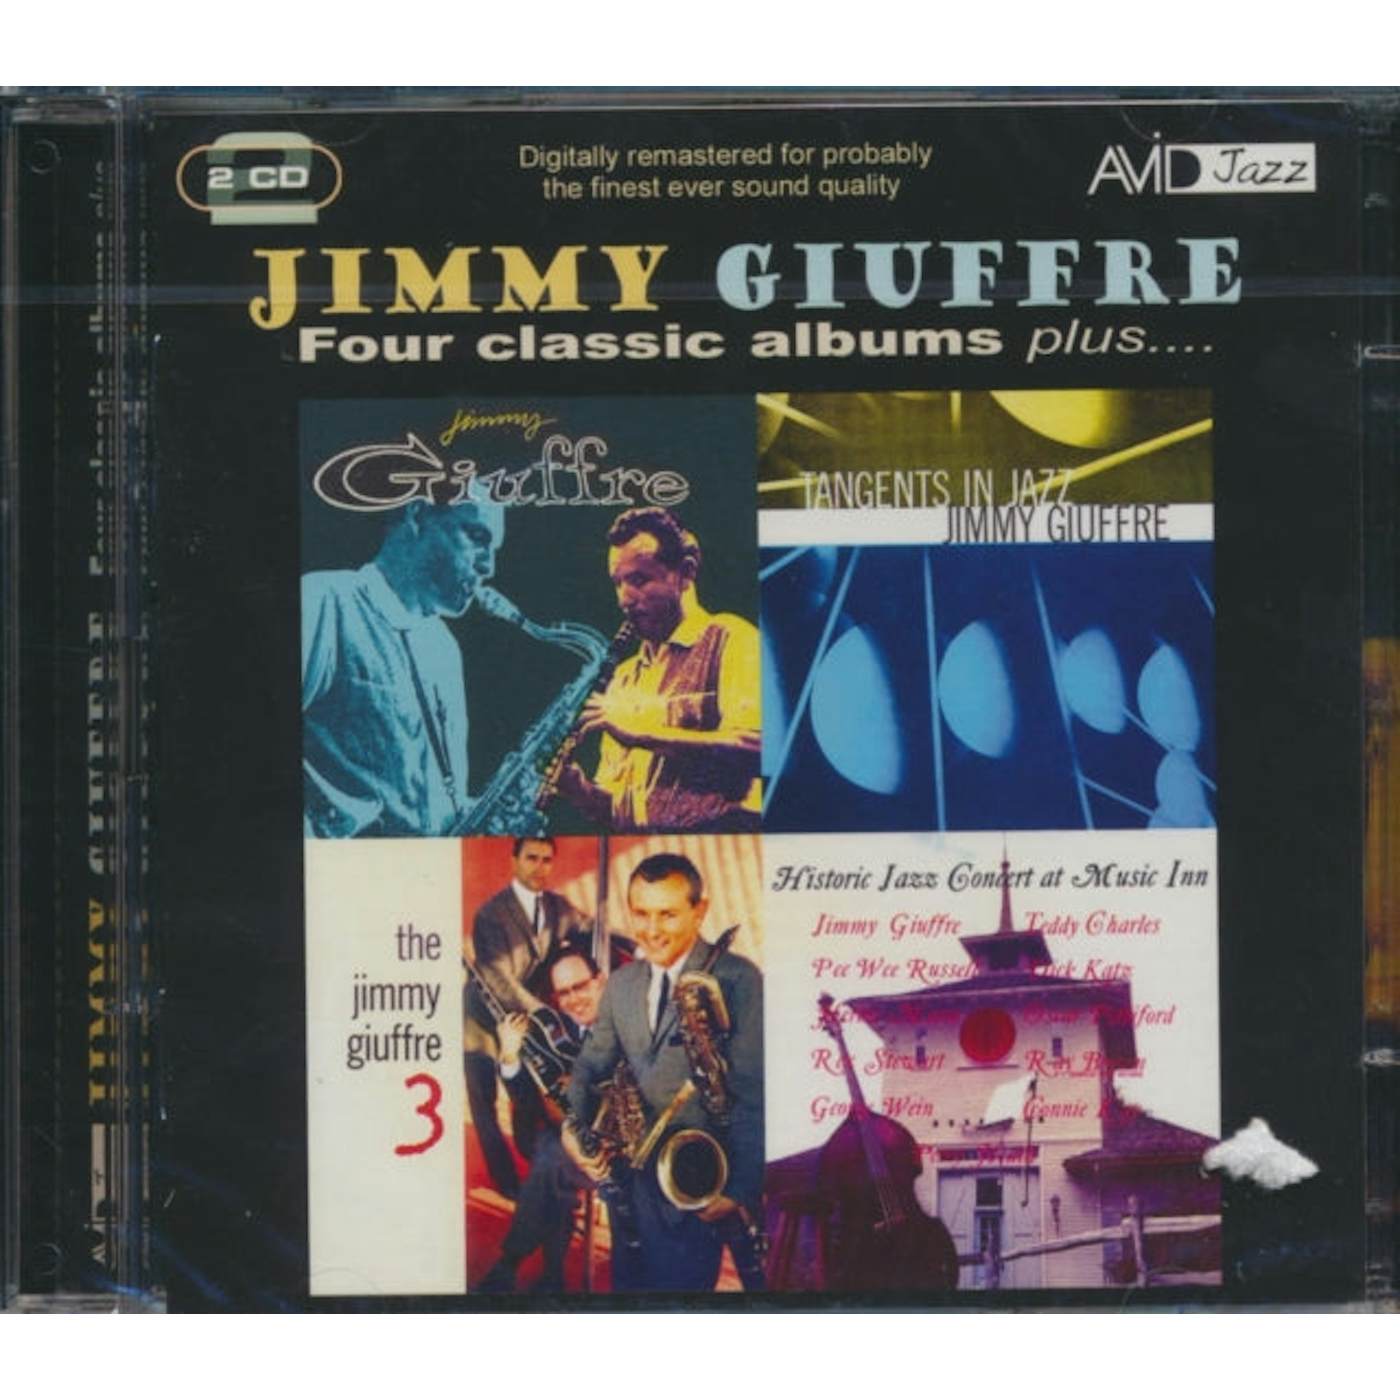 Jimmy Giuffre CD - Four Classic Albums Plus (Jimmy Giuffre / Tangents In Jazz / The Jimmy Giuffre 3 / Historic Jazz Concert At Music Inn)